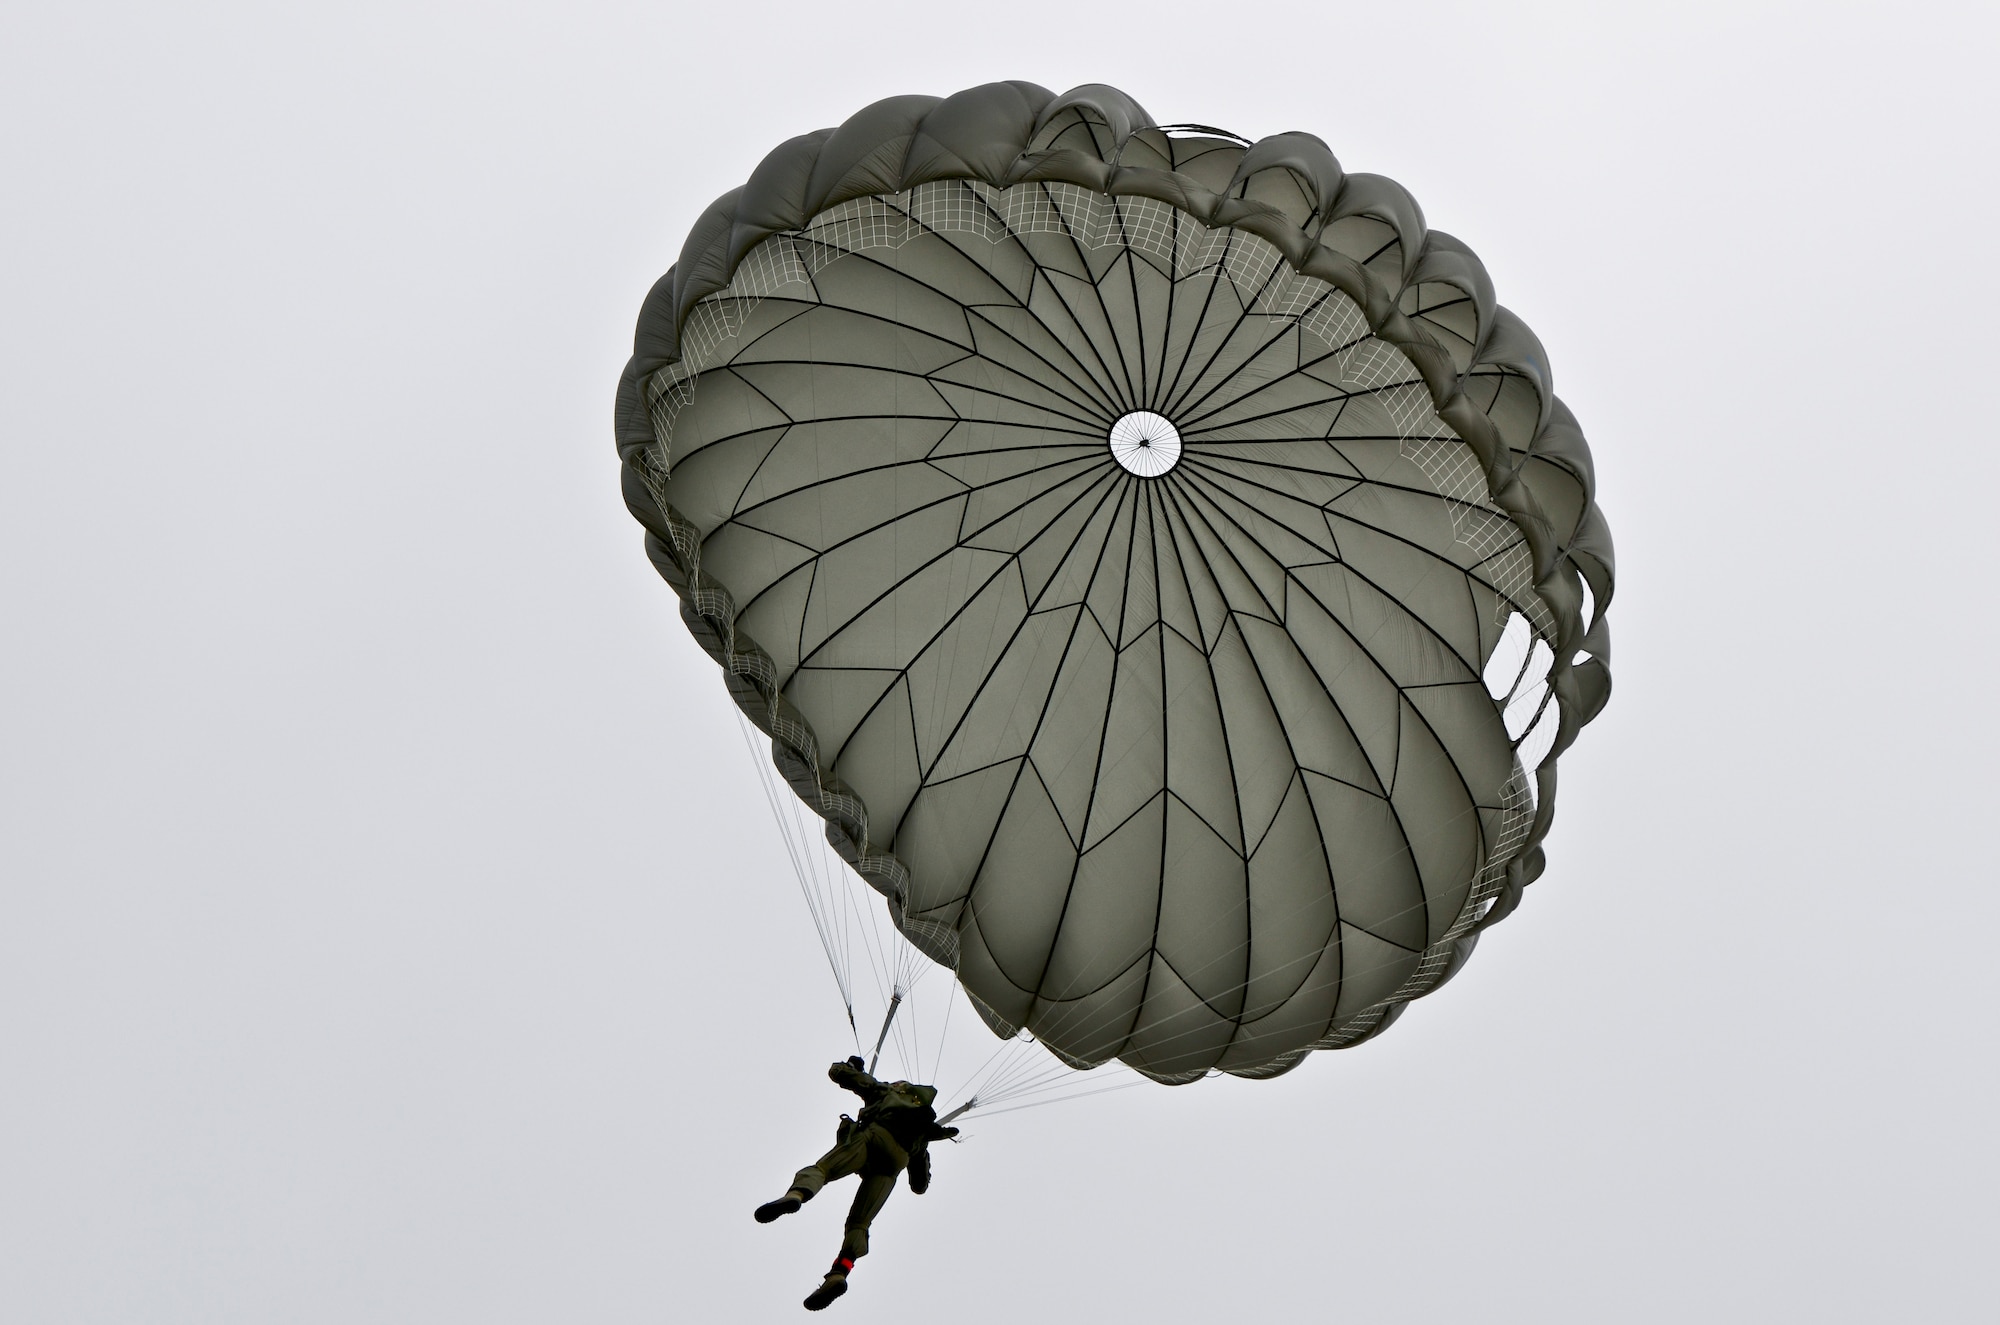 A member of the 736th Security Forces Squadron makes his way to the ground Aug. 21, 2013, during a static line jump over the Andersen Air Force Base, Guam, flightline. Air Force static line capability falls under the personnel parachute program. Jumpers are first qualified during a three-week long basic airborne course at Ft. Benning, Ga., and then continue to work on their jumping proficiency and qualifications after they return here. (U.S. Air Force photo by Airman 1st Class Marianique Santos/Released)